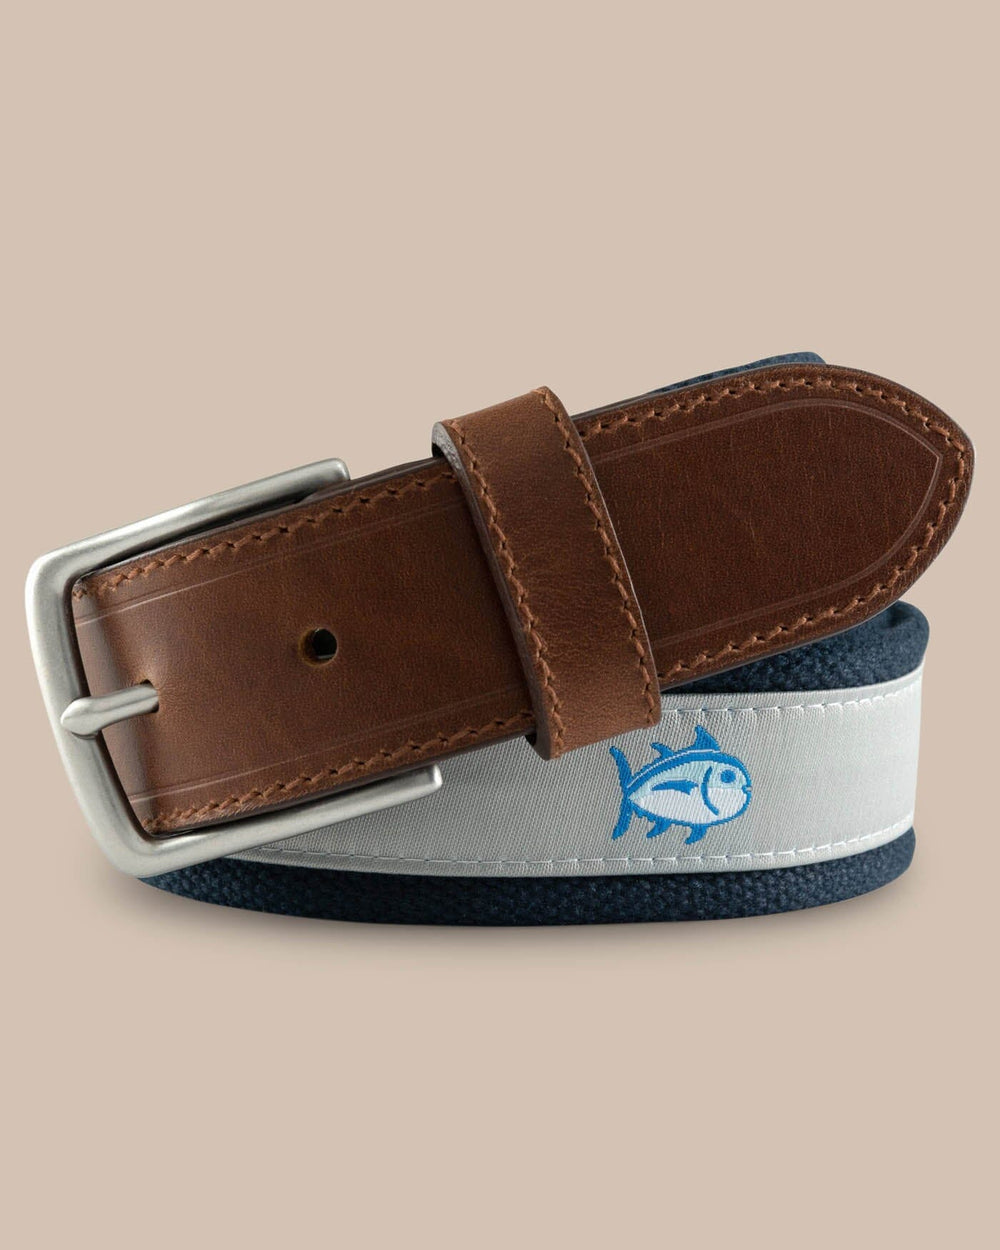 The detail of the Men's Grey Skipjack Ribbon Belt by Southern Tide - Seagull Grey